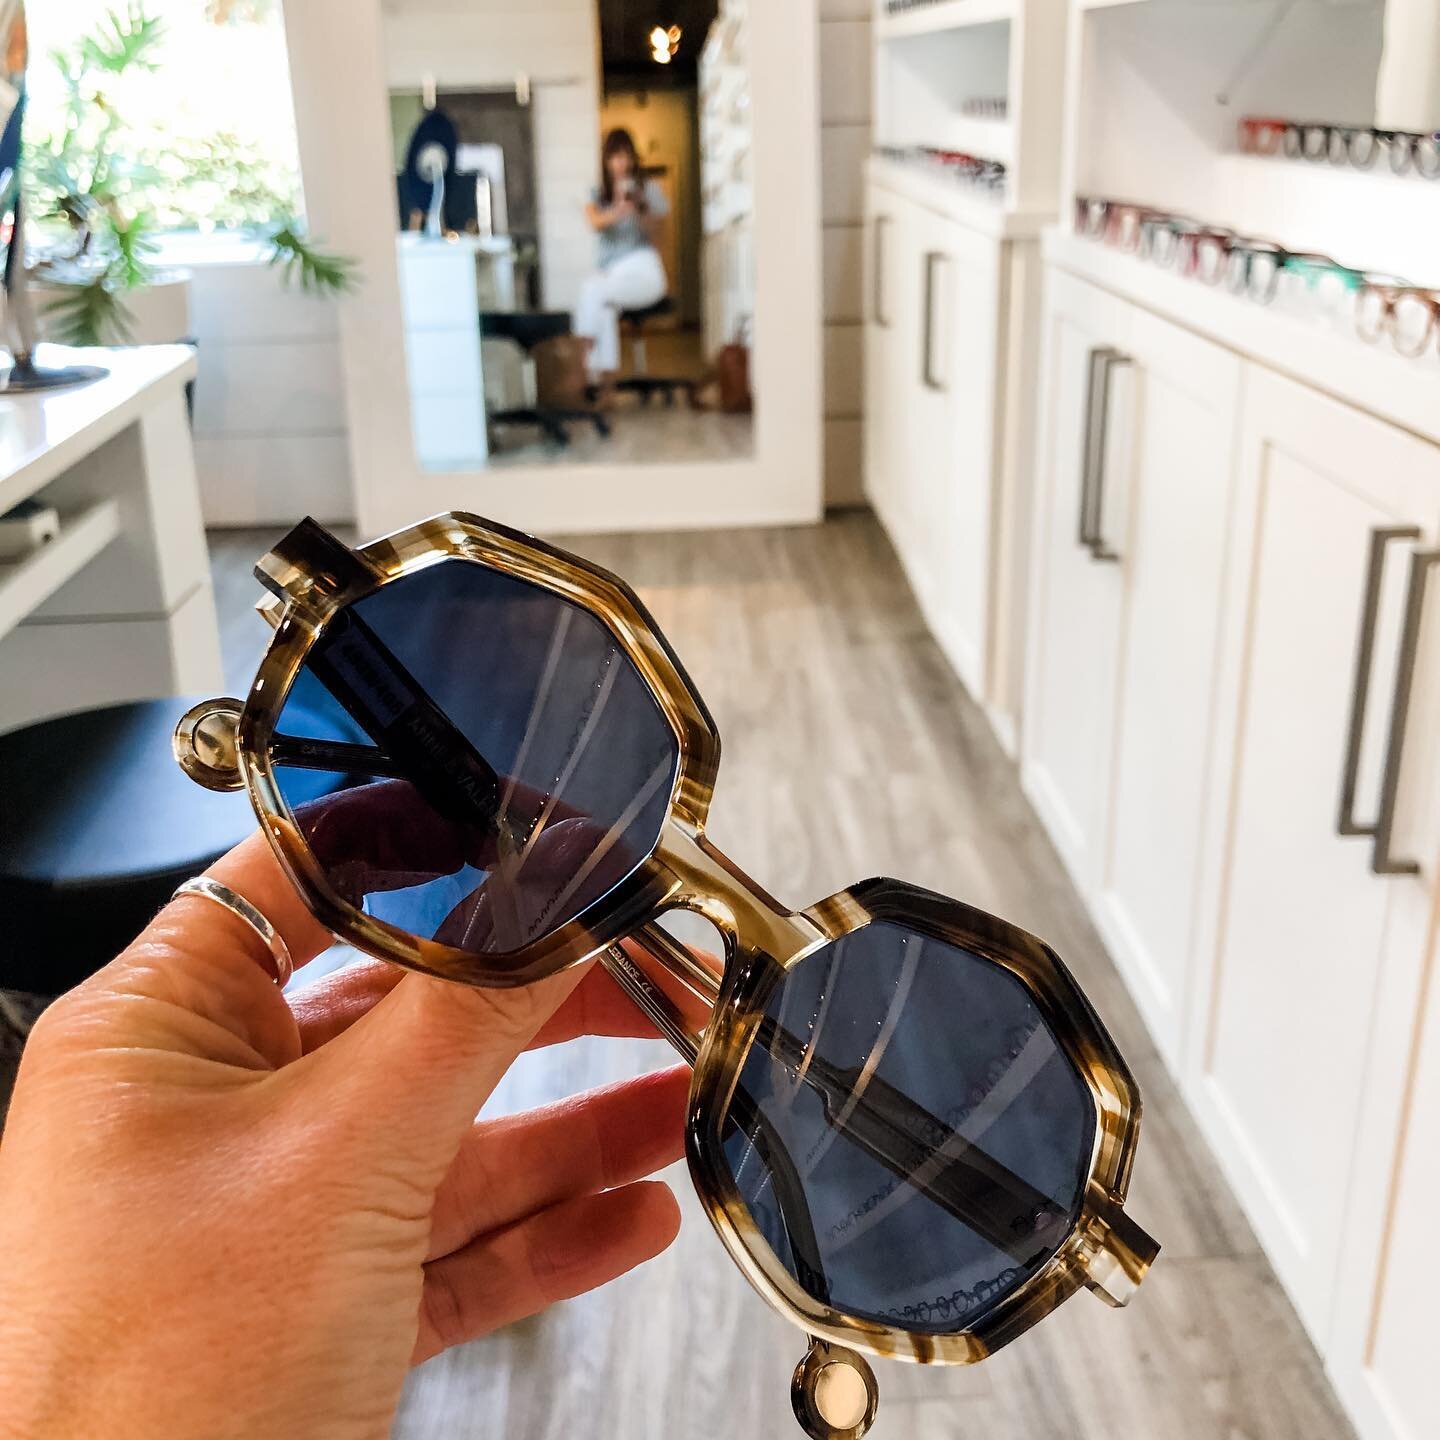 Rain rain go away&hellip; ☔️ sending sunny vibes on this rainy Saturday with these @anneetvalentin / Storm Sun (appropriately named for the forecast today)!

Not your average eyewear at @optikk30a! You won't find frames like these anywhere else!
.
.
